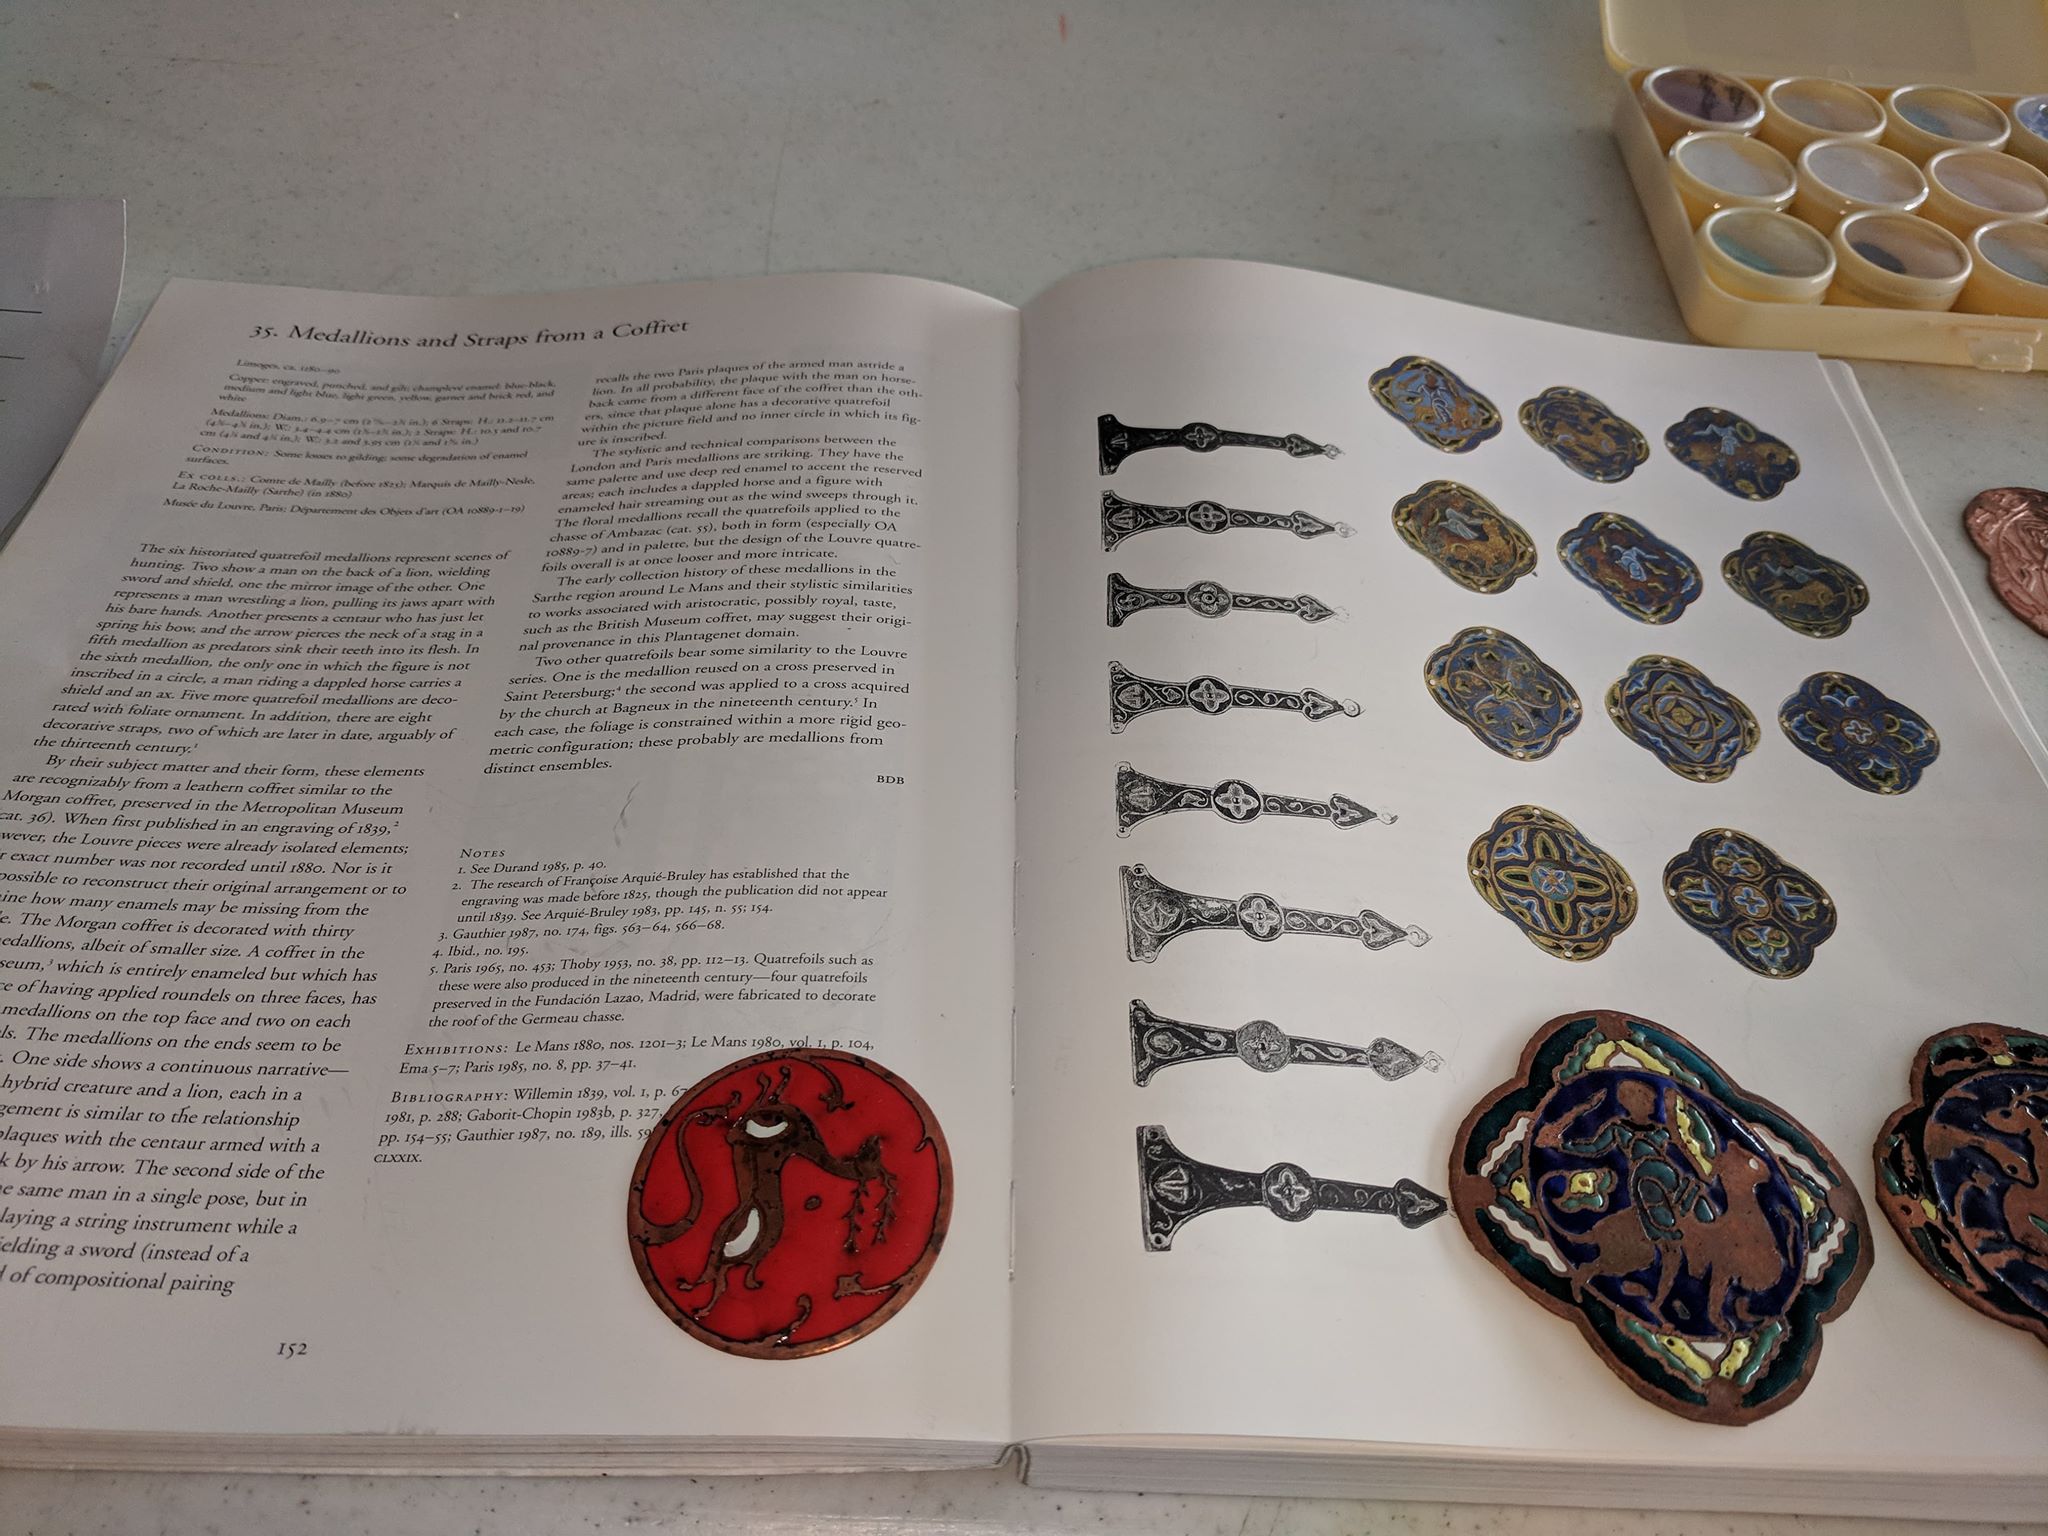 Some enamels next to the source book